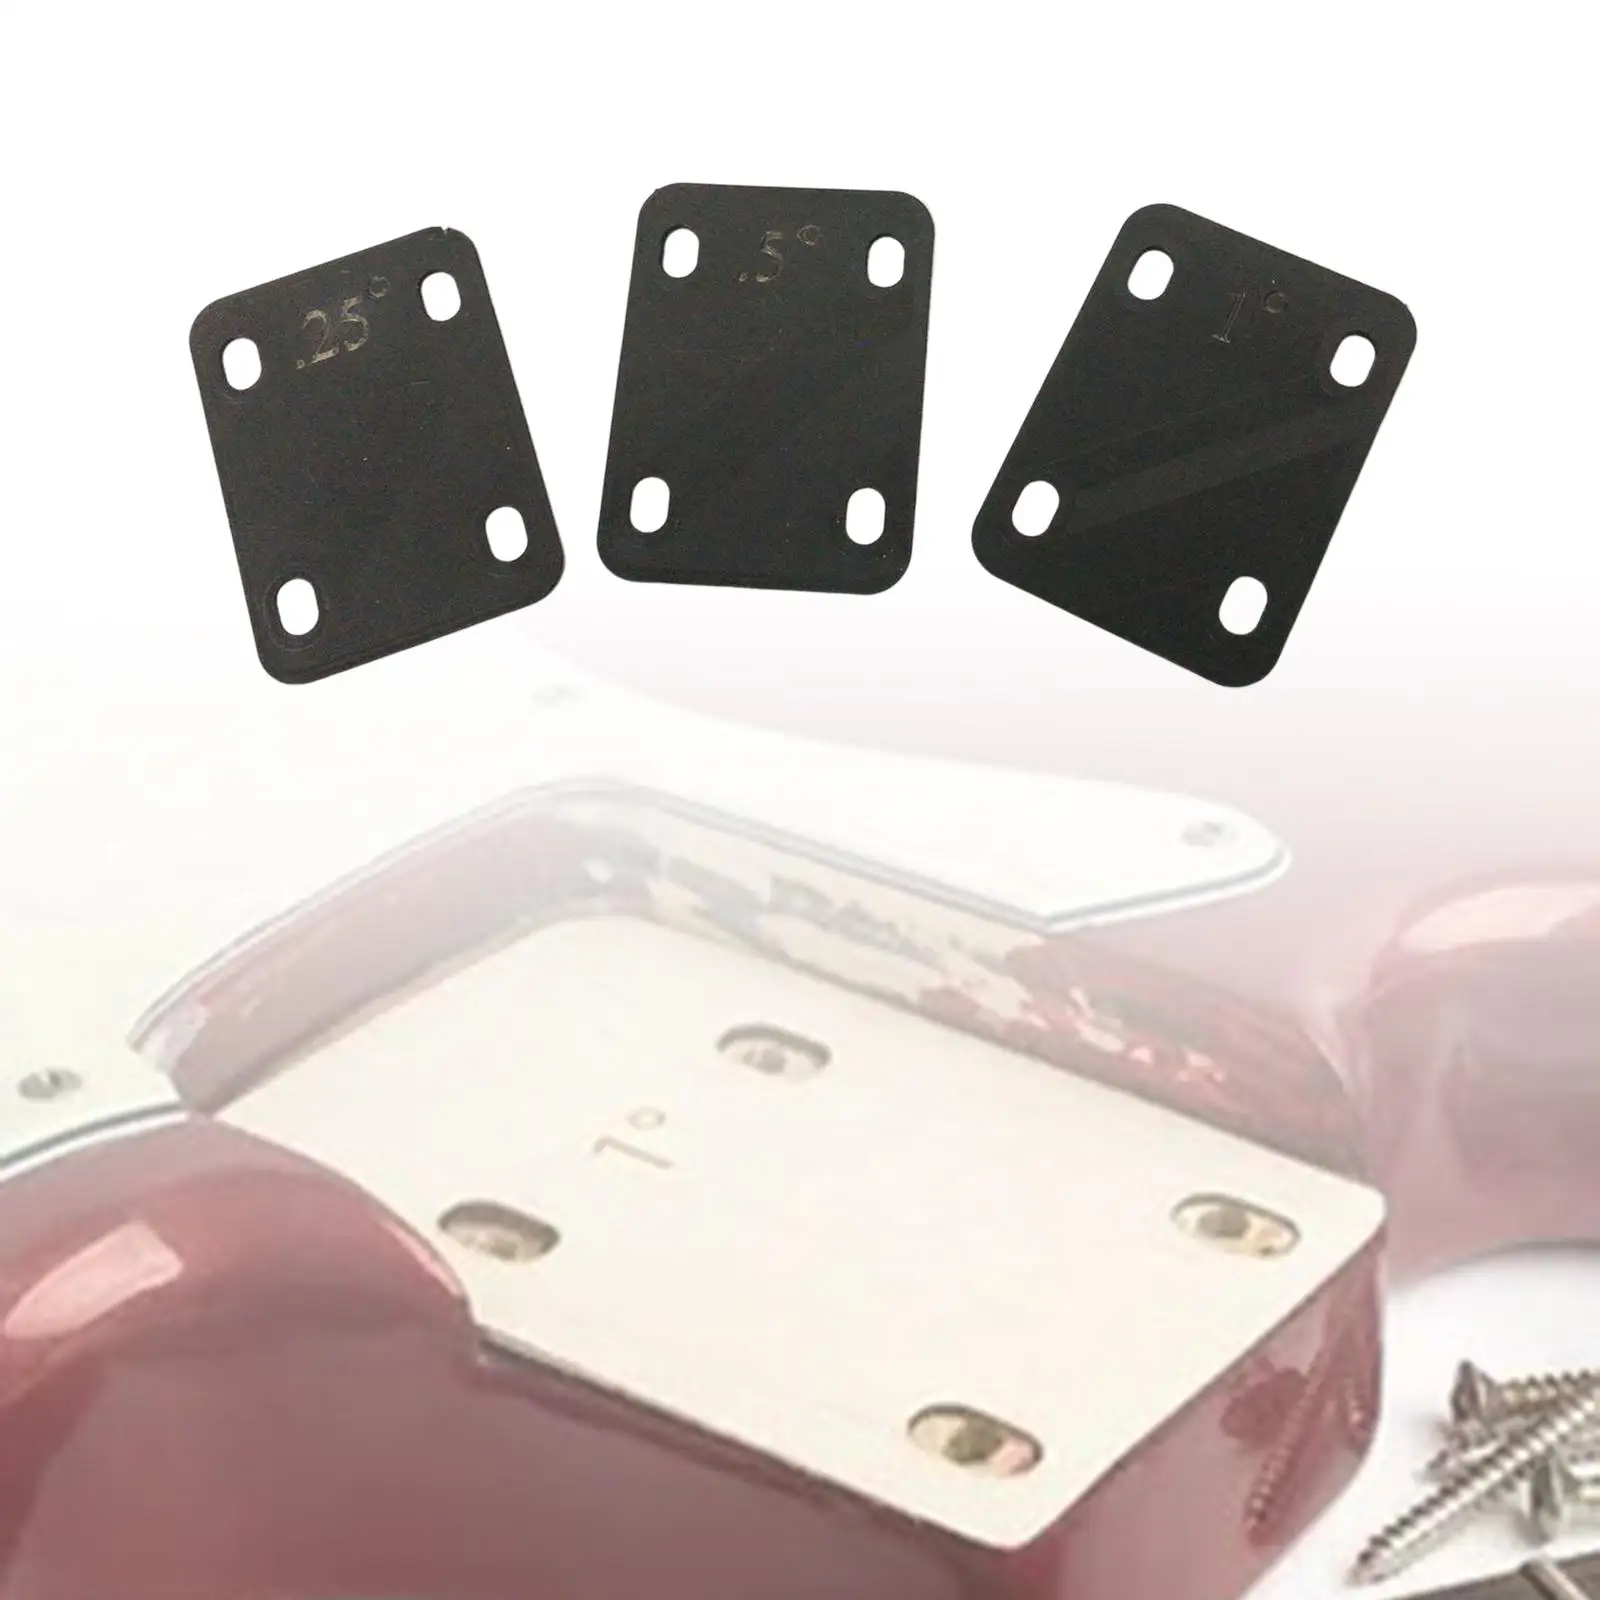 

3x 4 Holes Neck Plate Gasket Accs Replacement Part Pad Cushion Shim Black Neckplate for guitar masters Electric Guitar Guitarist